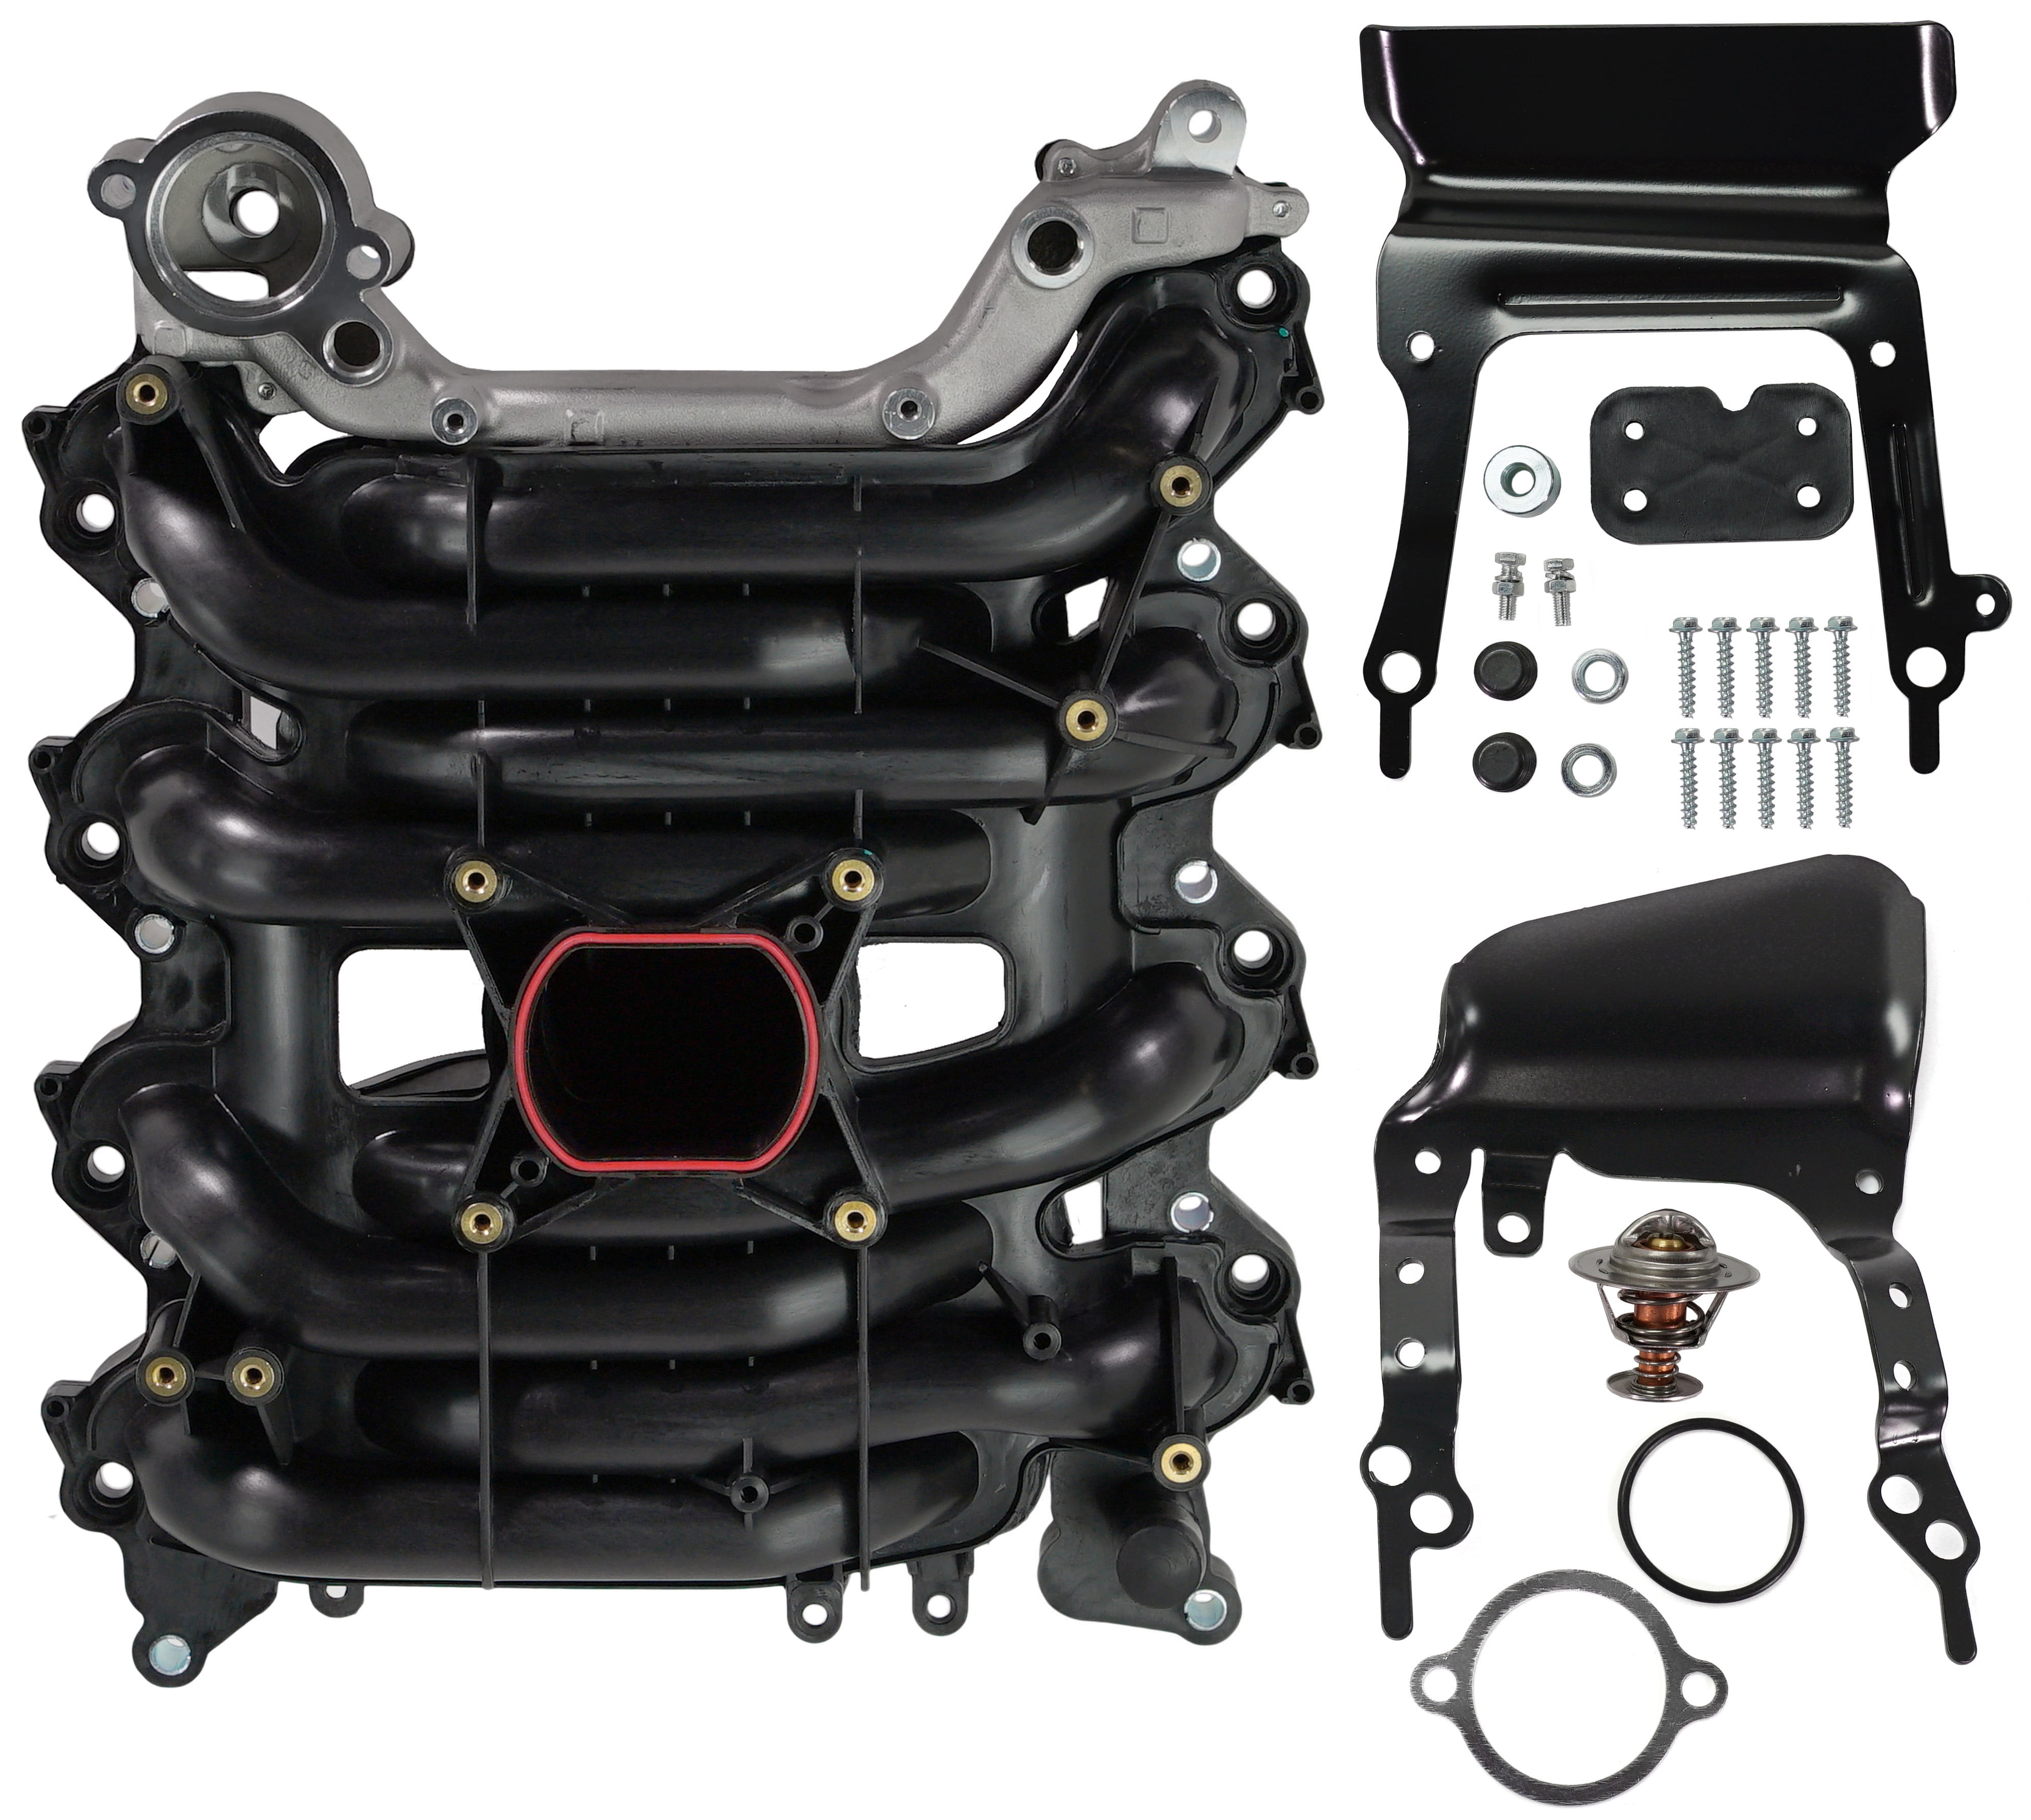 MUCO MCM424B Intake Manifold w/Gasket Kit Fits for 1996-2000 Ford Mustang Crown Victoria Mercury Grand Marquis 